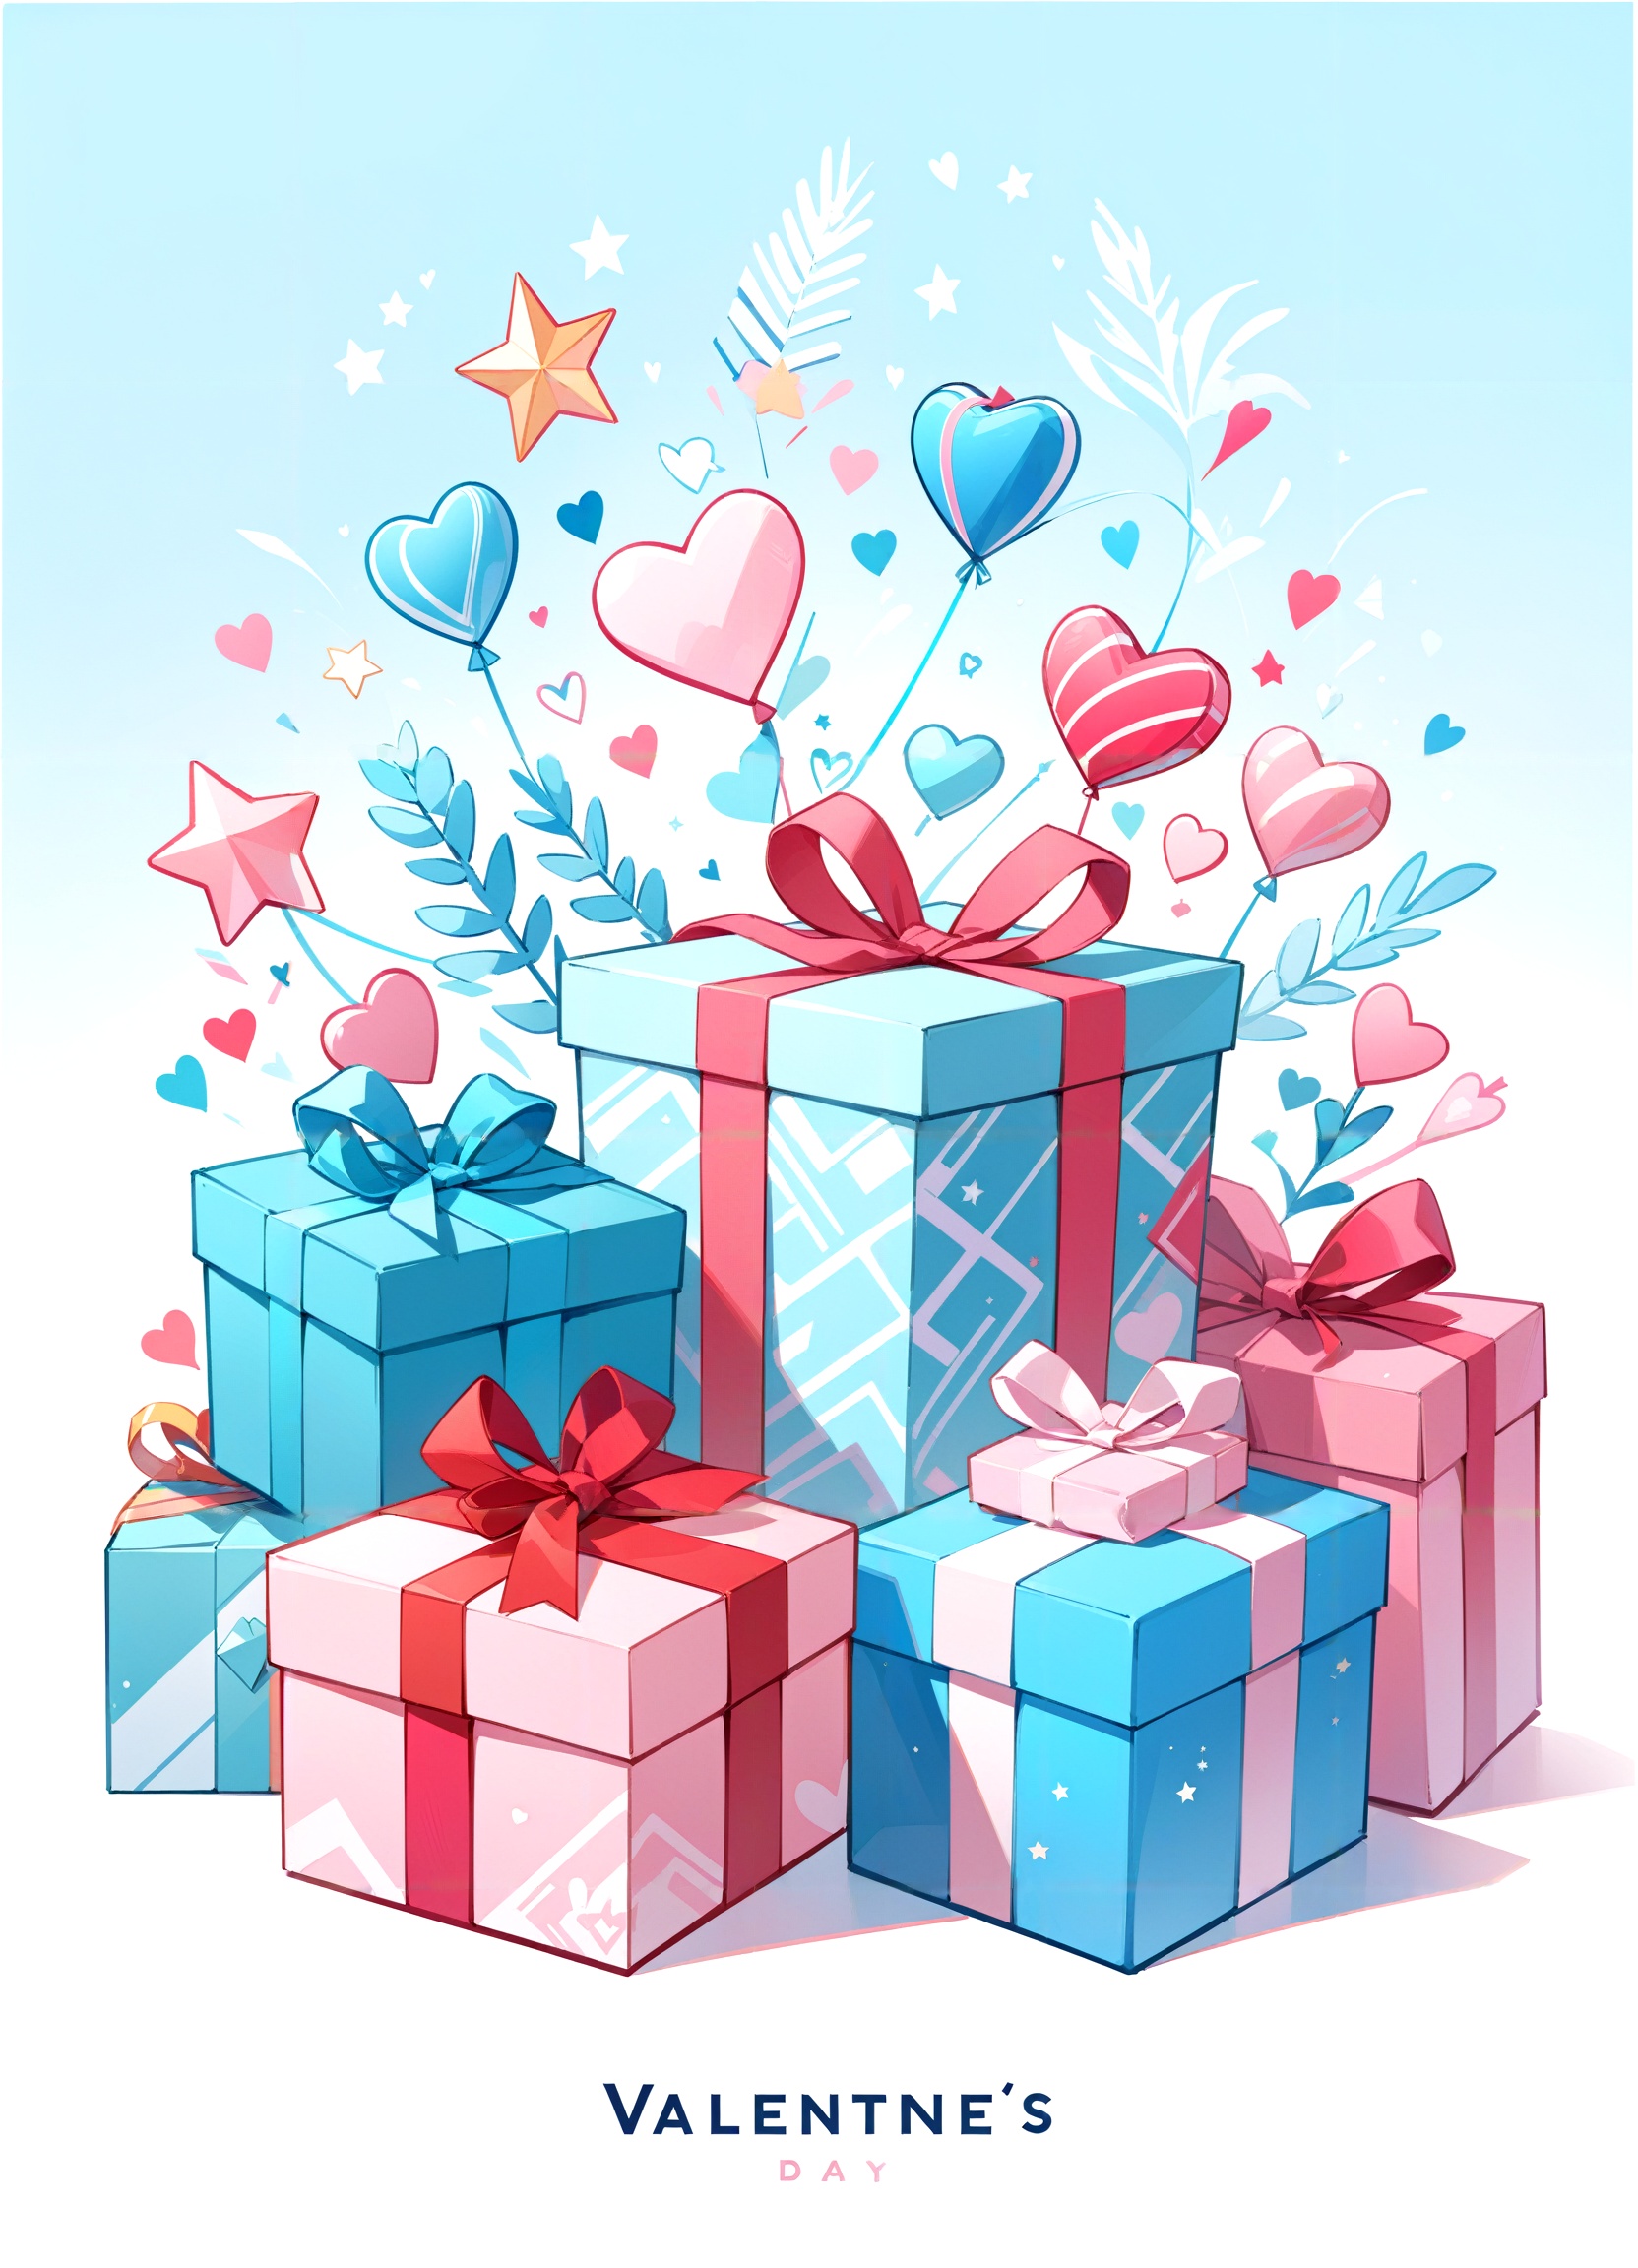 Valentine's Day illustration, flat drawing,simple drawing,minimalism,pastel background, festive, holiday theme, abstract ornaments, graphical elements, gift boxes, simple design, modern style, visual design, vivid color palette, textured surface, celebration concept, decorative pattern, seasonal decoration,stylized heart and star decoration,pink and blue tone color